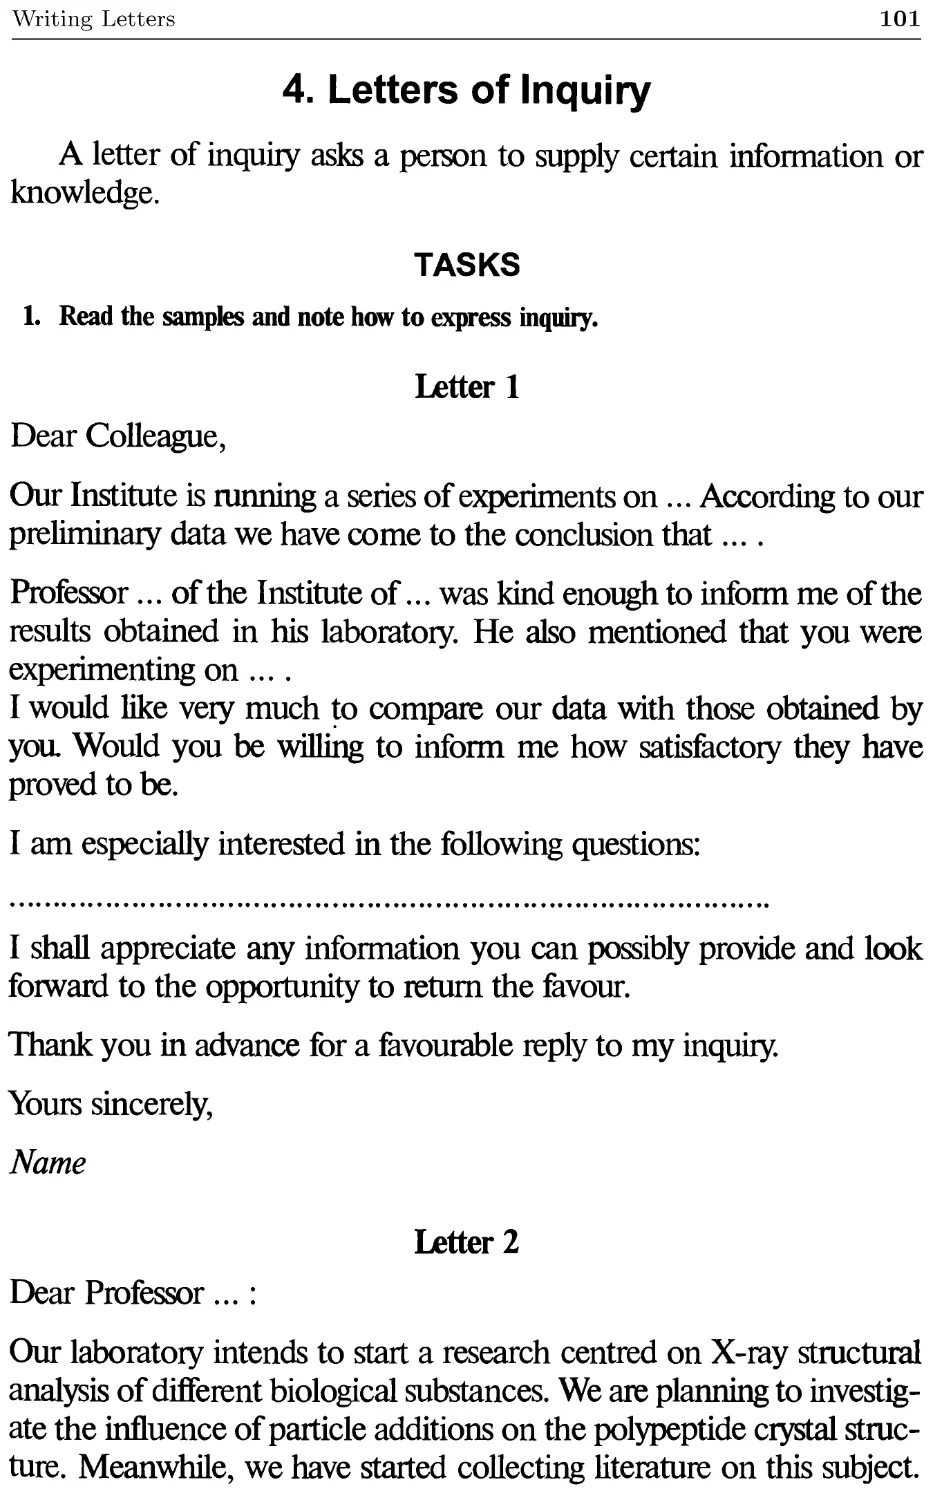 4. Letters of Inquiry